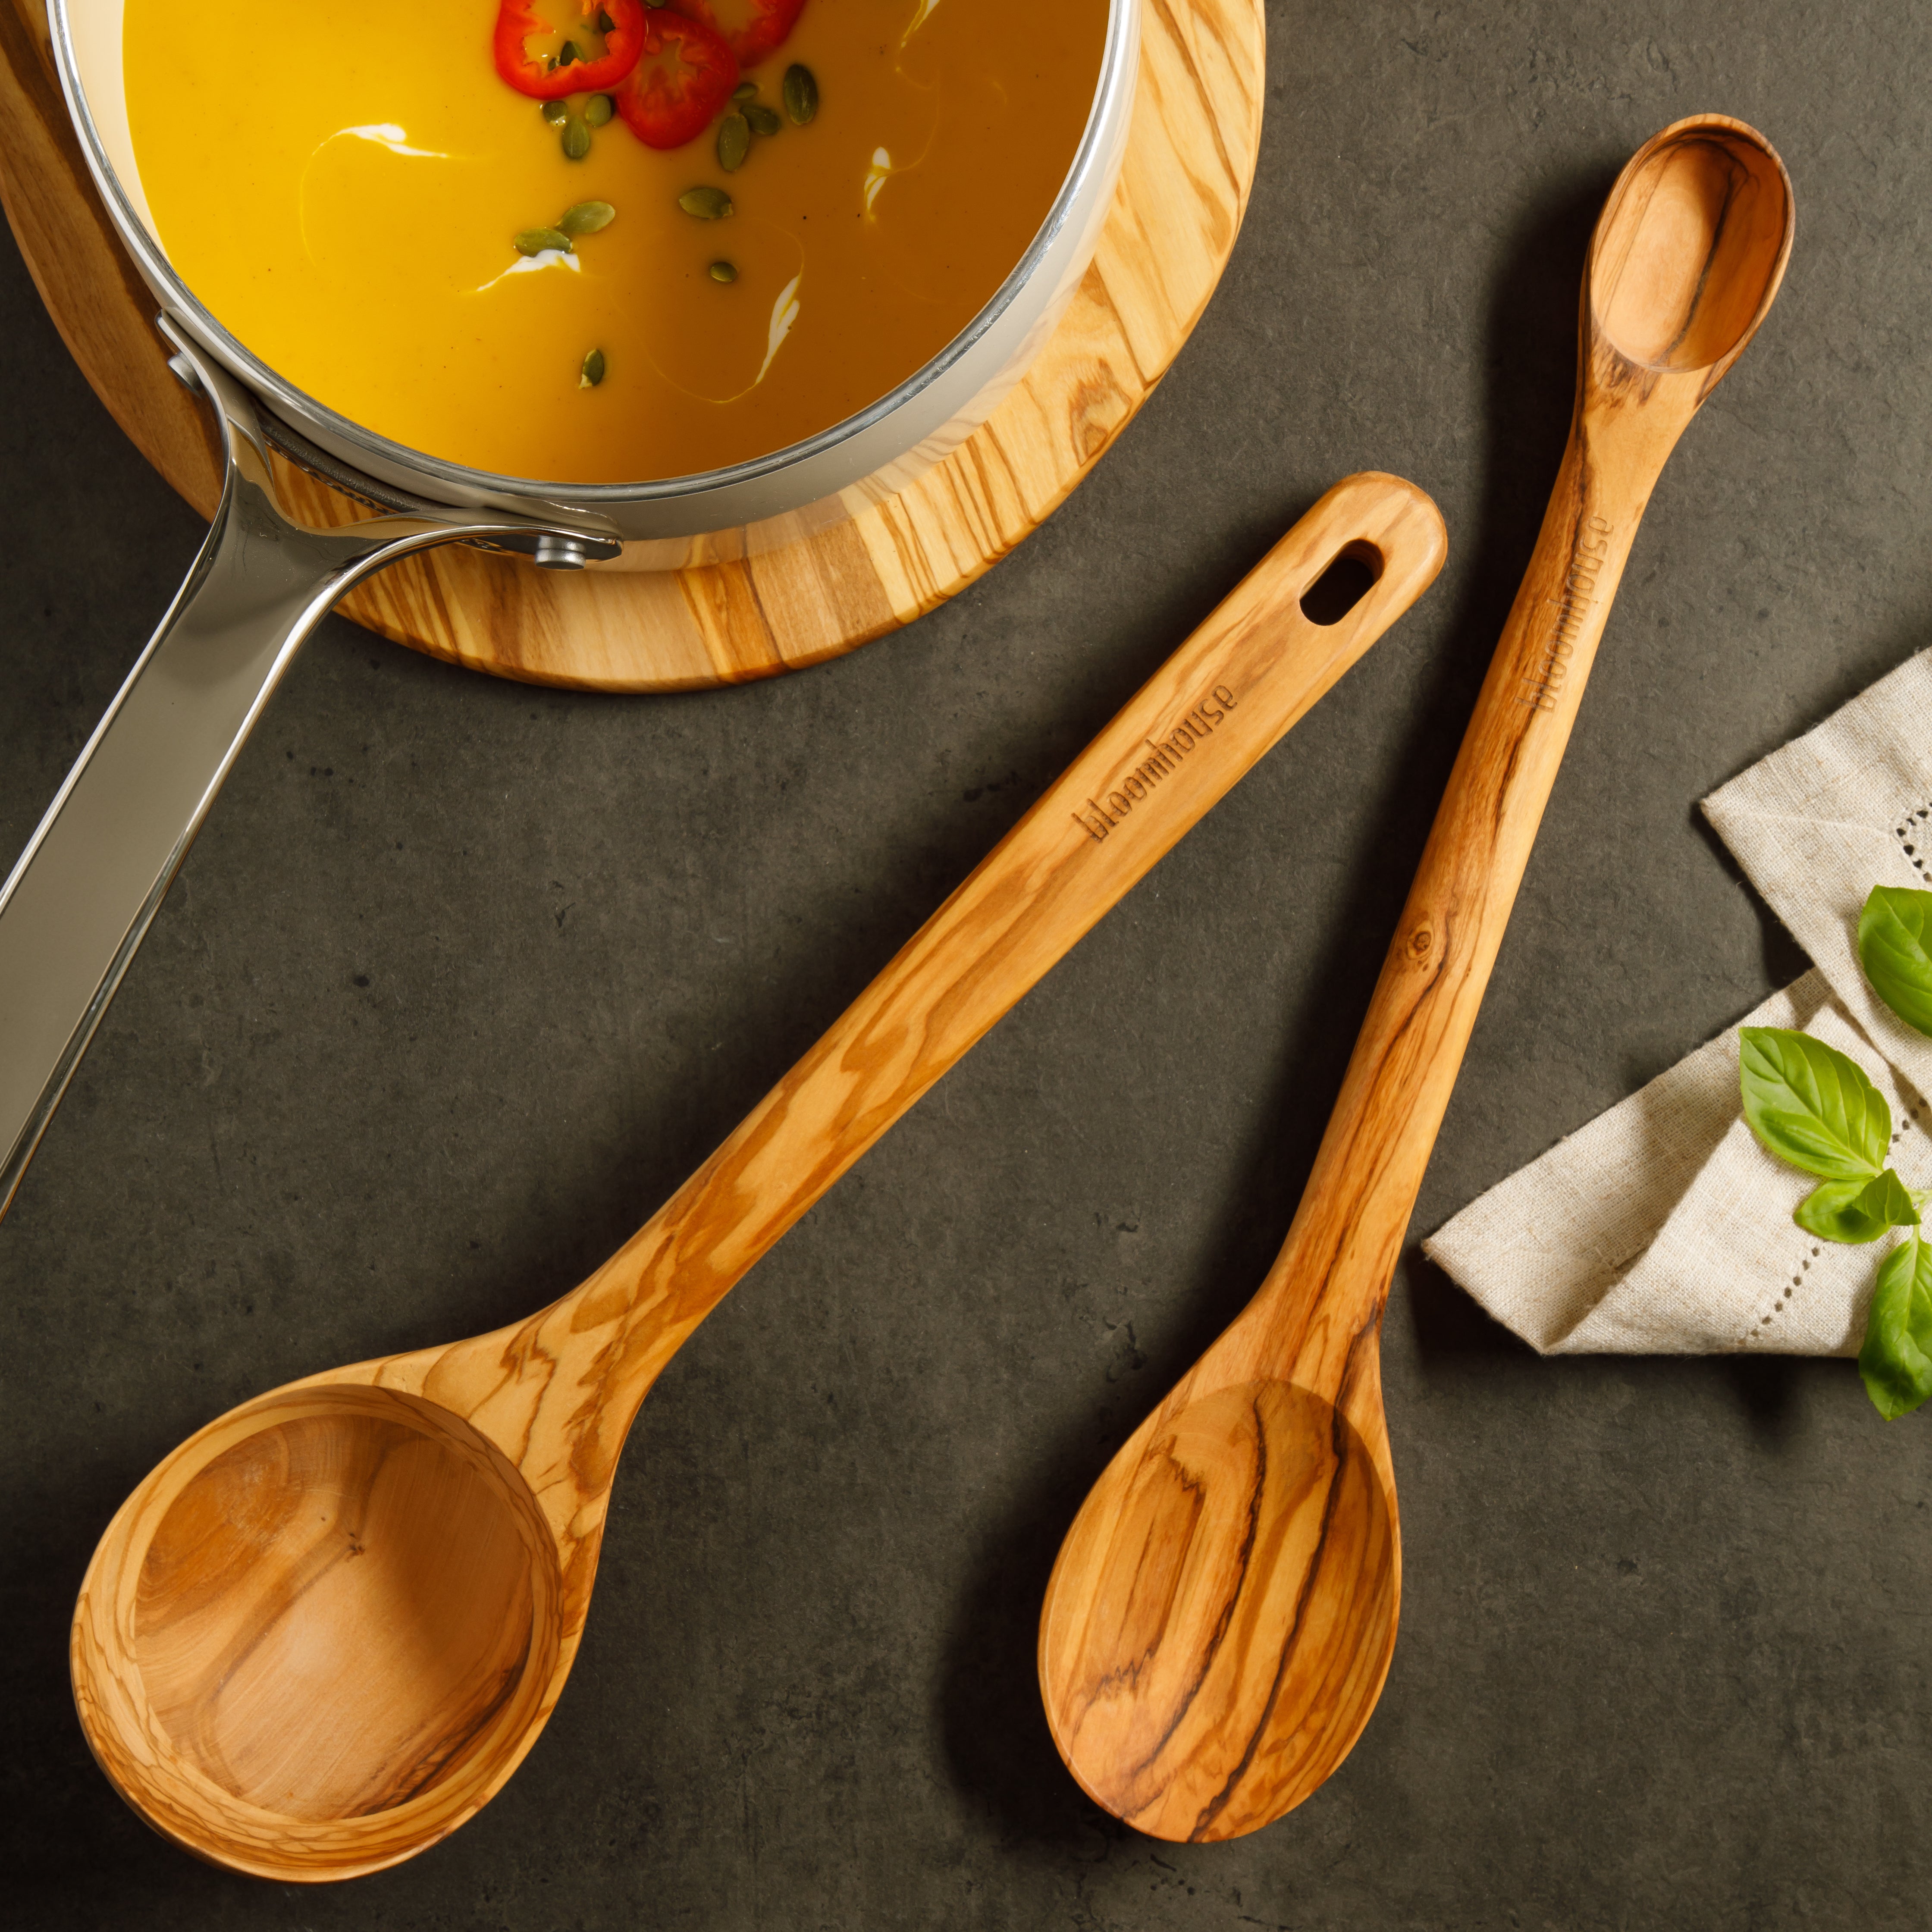 Bloomhouse Italian Olive Wood 2-Piece Extra-Large 14 Inch Ladle and Tasting Spoon Set